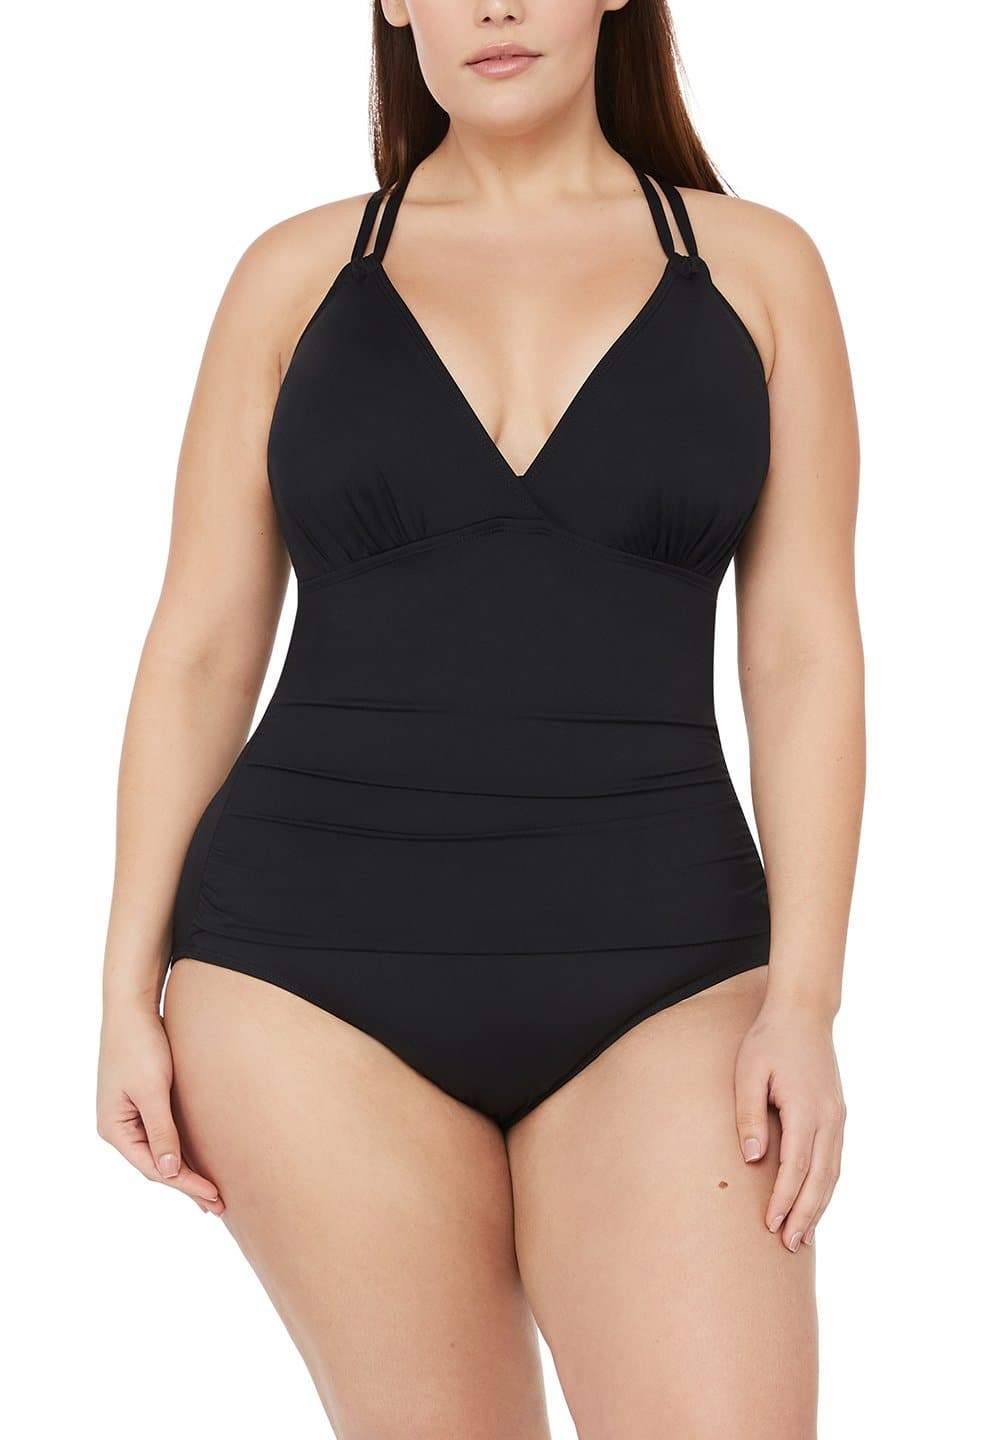 Belize Goddess One Piece Swimsuit – Miraclesuit